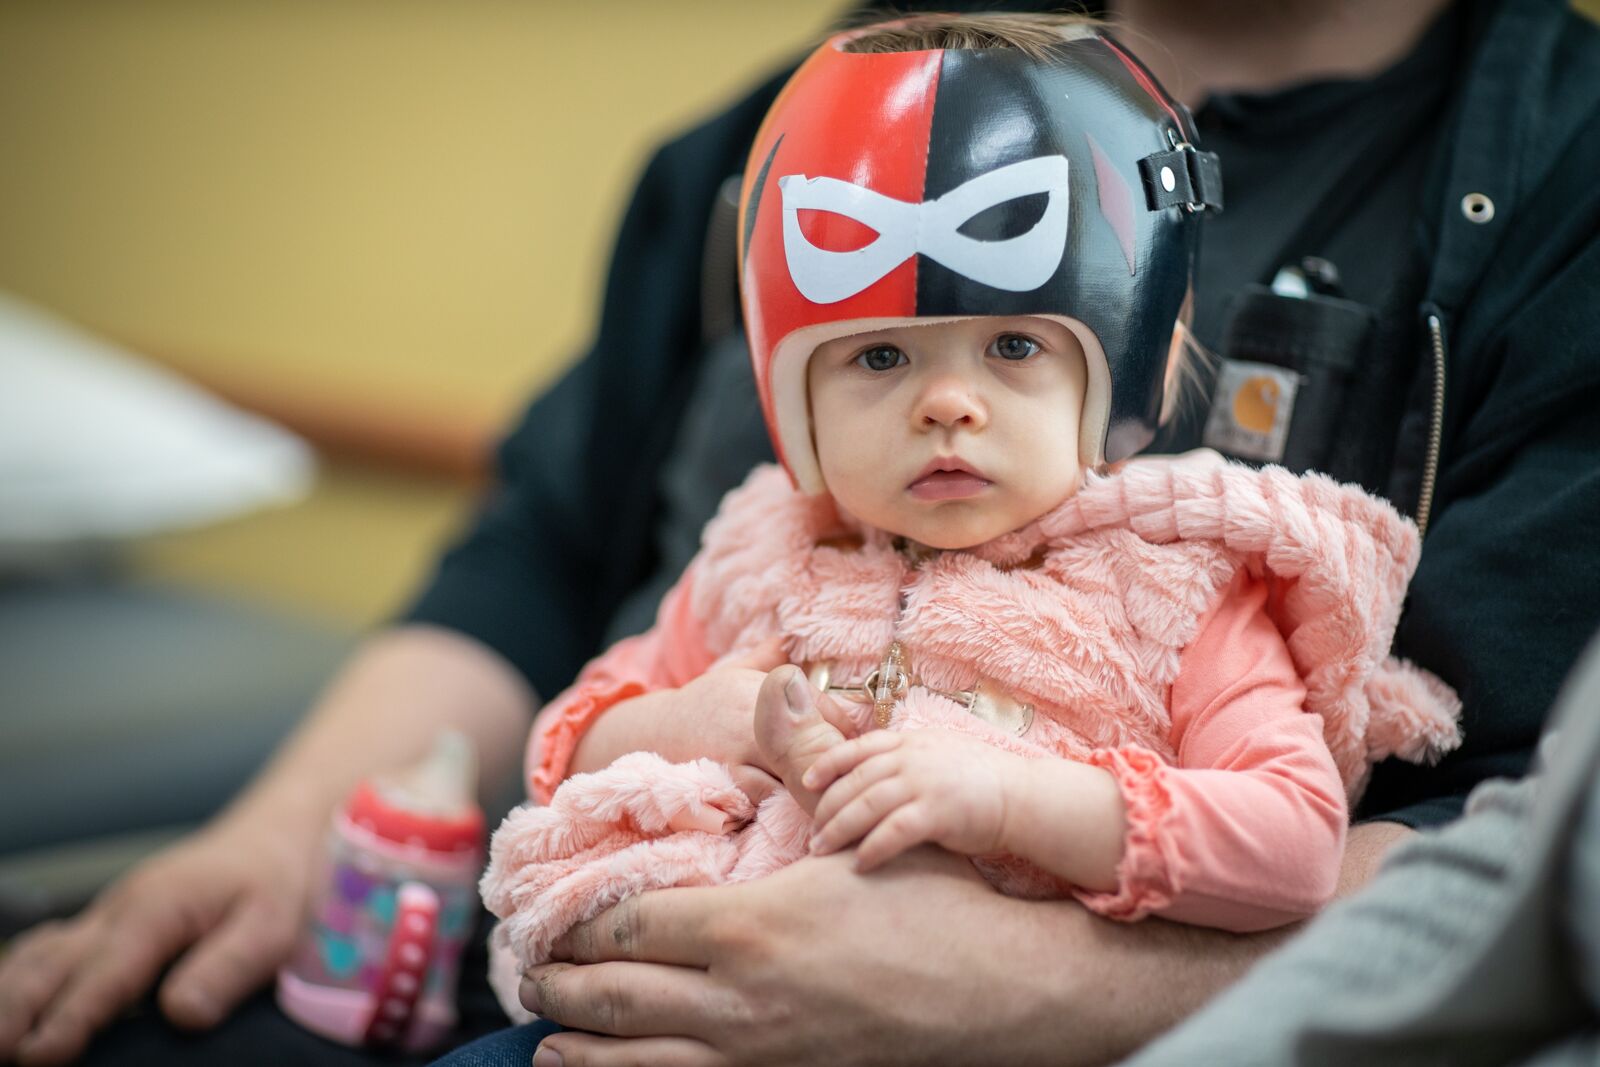 A baby wearing a black and red helmet